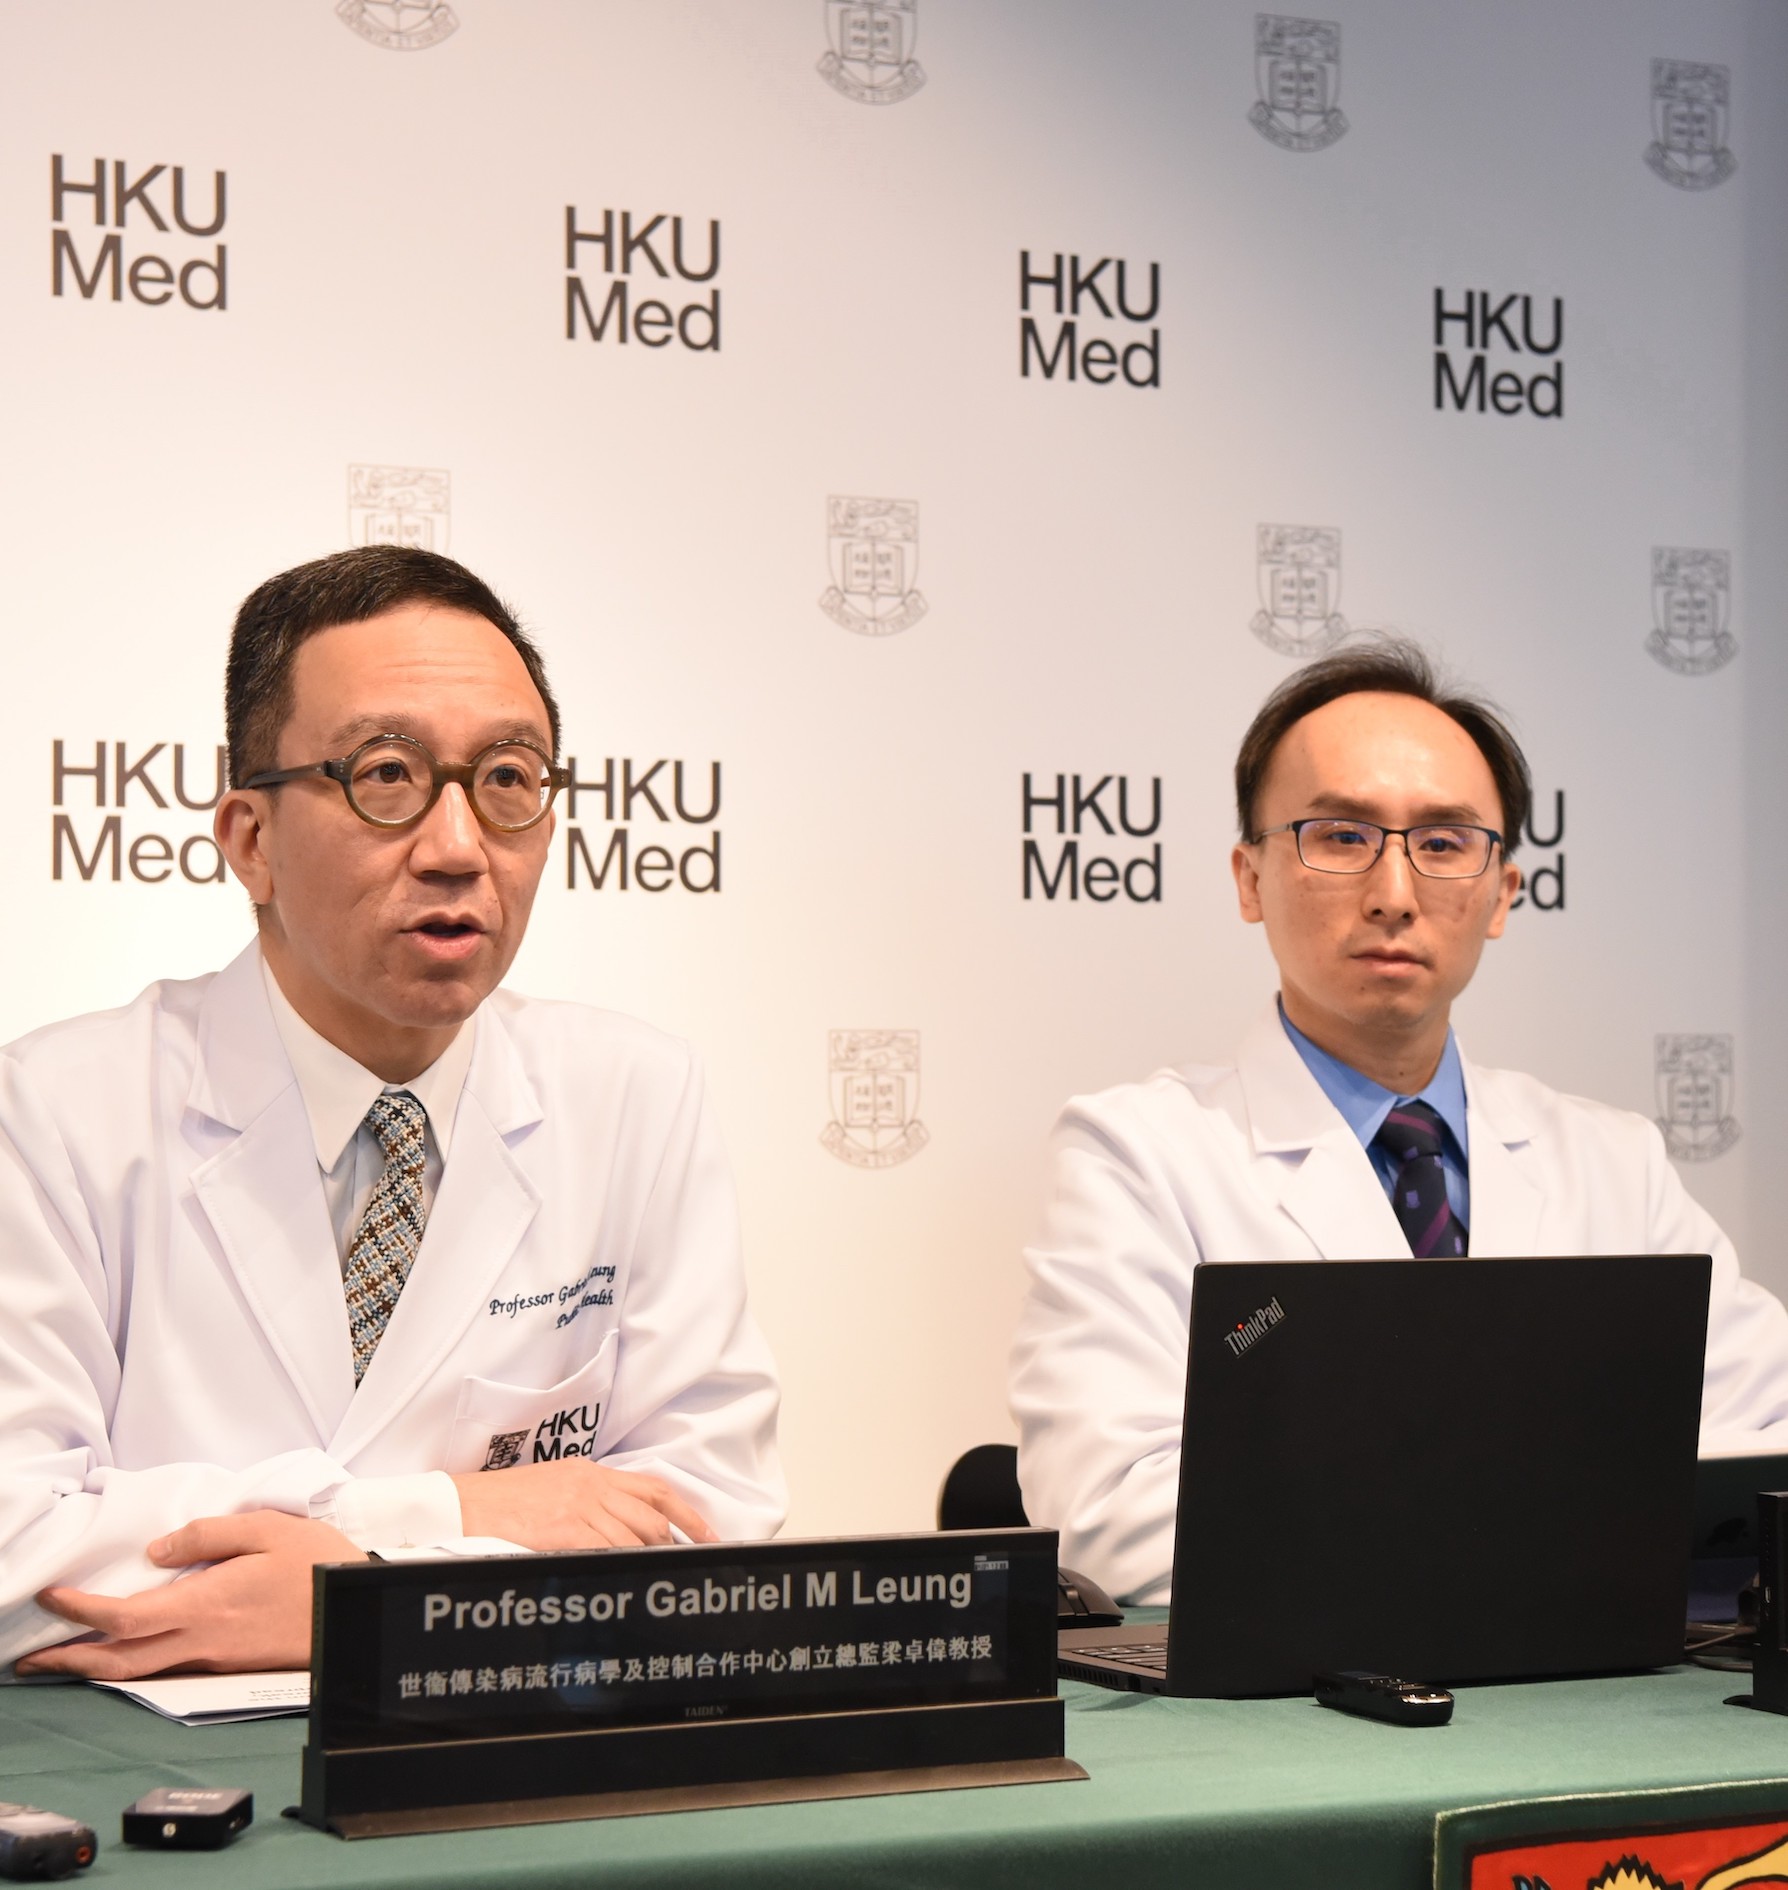 Professor Gabriel Leung, HKU Dean of Medicine (left) and Professor Joseph Wu, Professor, Division of Epidemiology and Biostatistics, School of Public Health (right) present real-time nowcast and forecast on the extent of the Wuhan CoV outbreak, domestic and international spread.